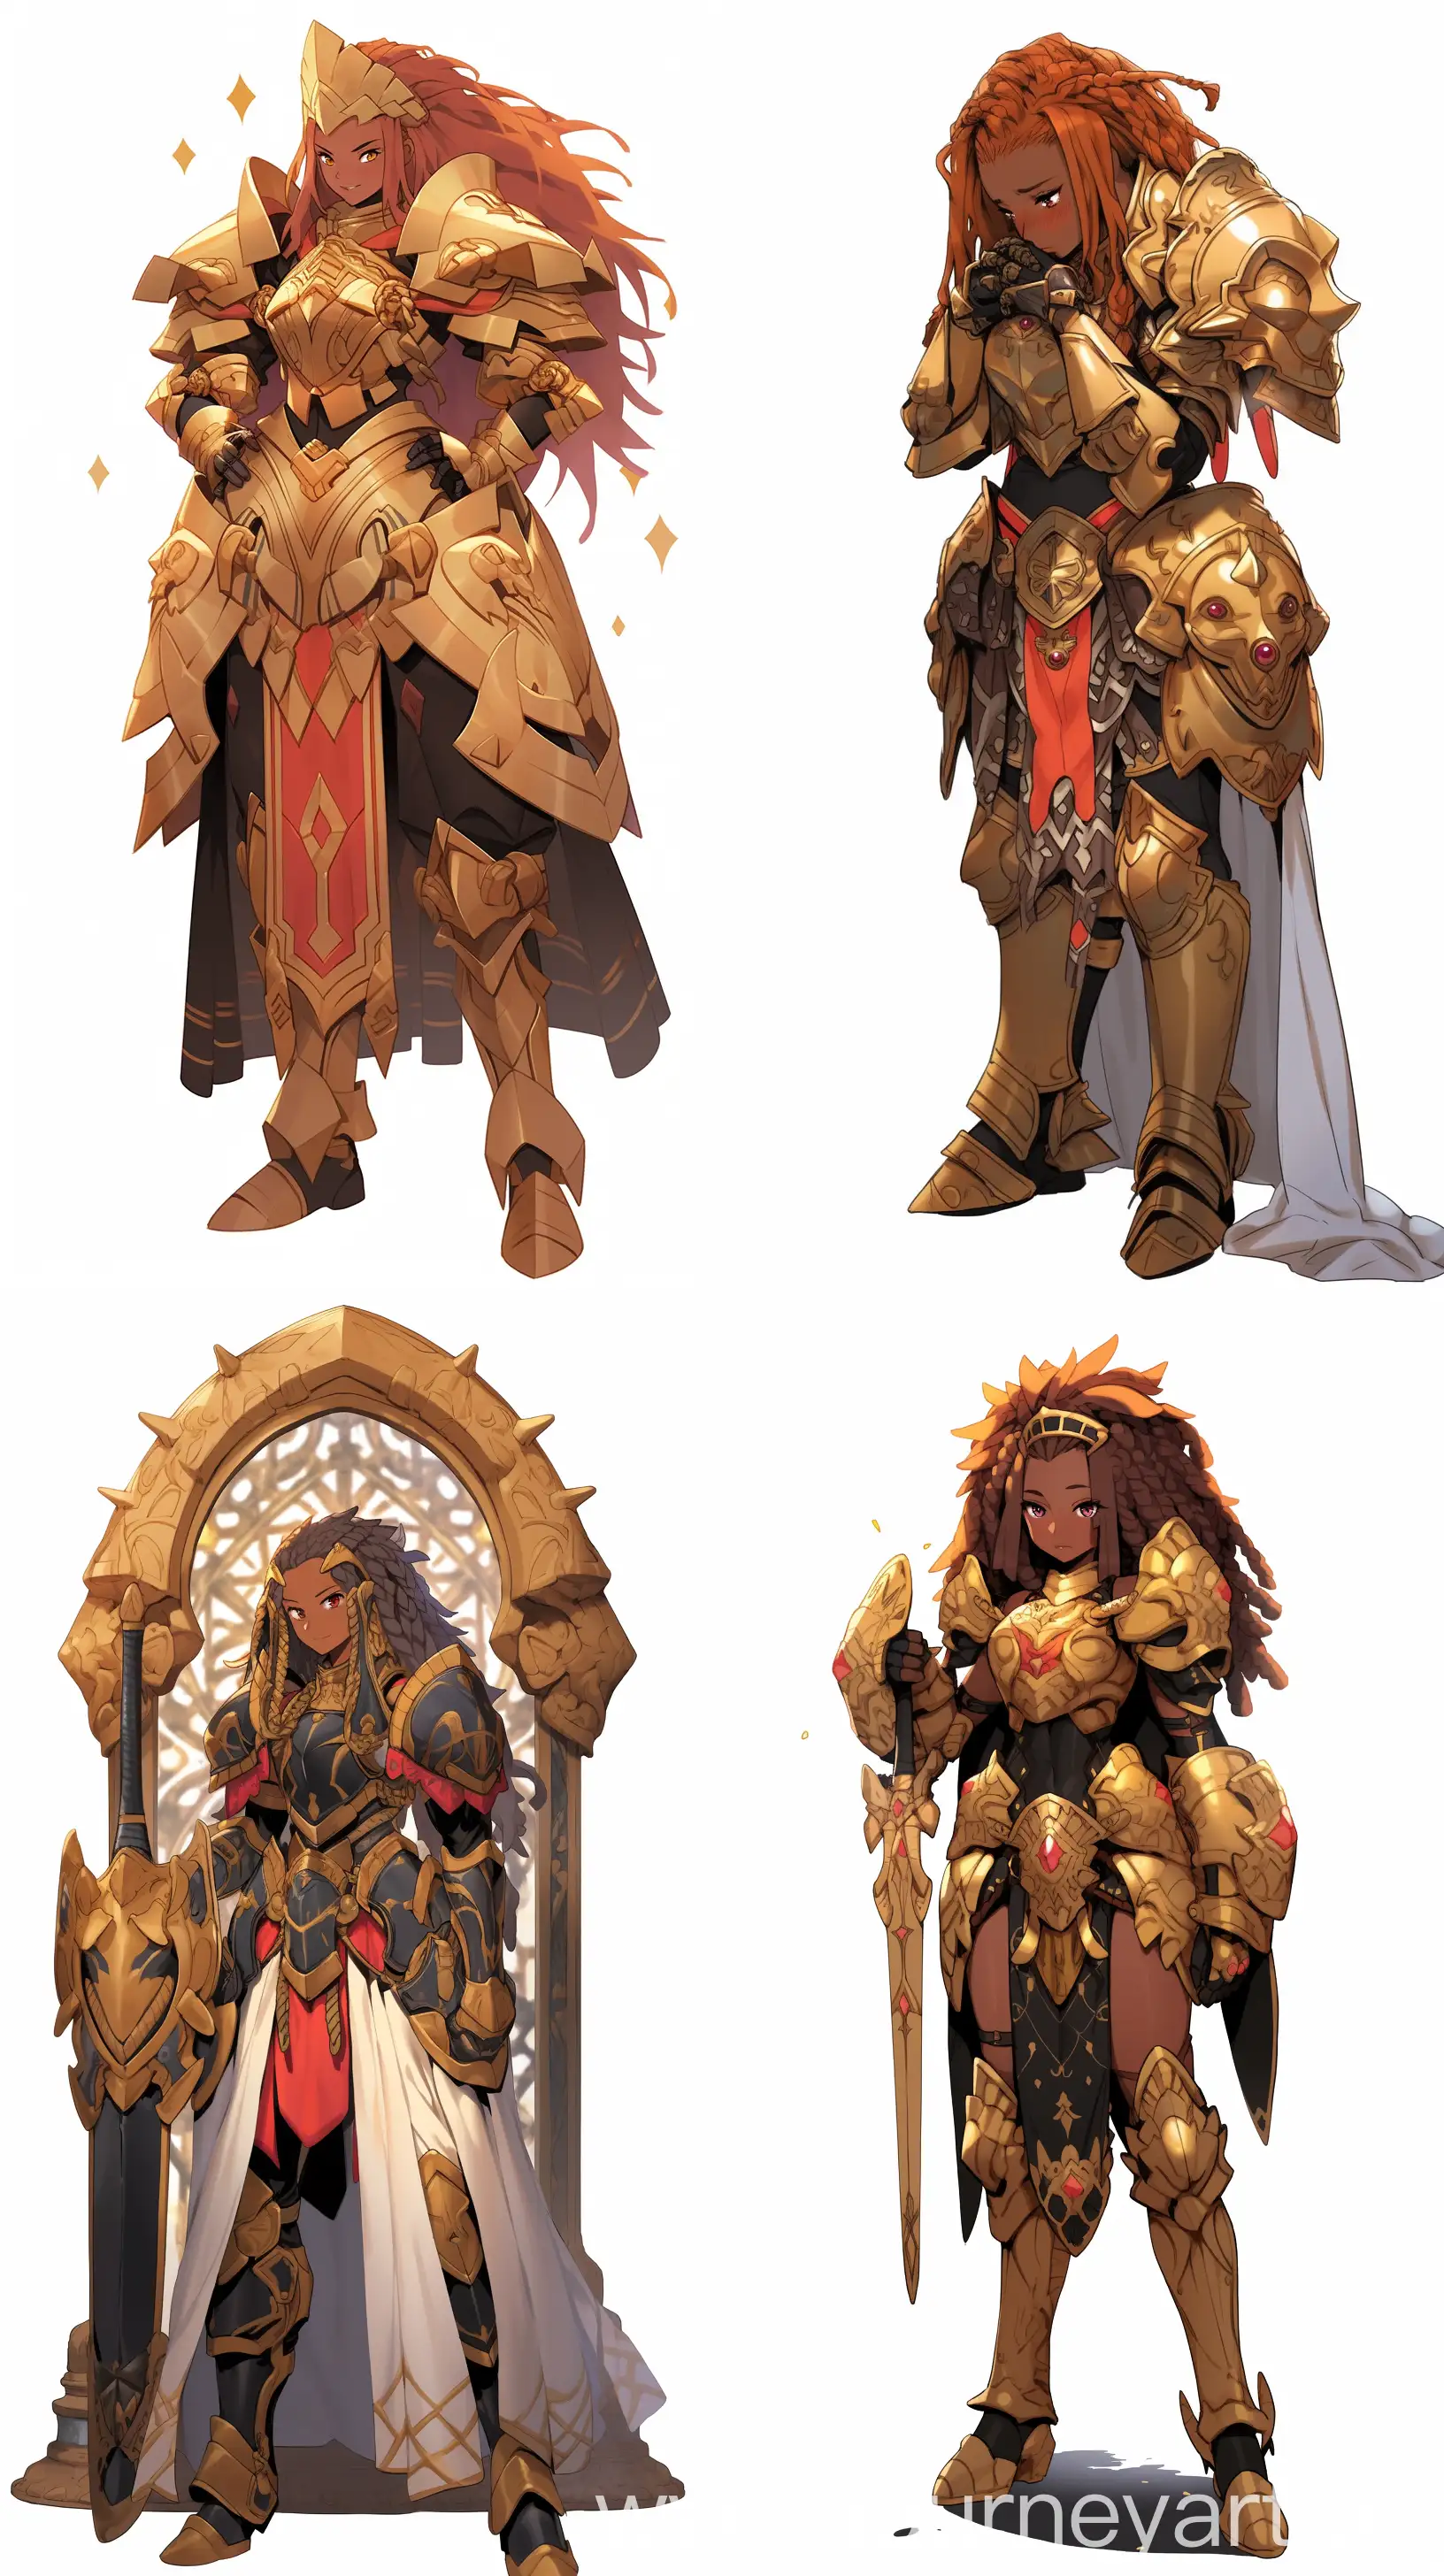 Majestic-African-Knight-in-Exquisite-Gold-Armor-Fantasy-League-of-Legends-Artstyle